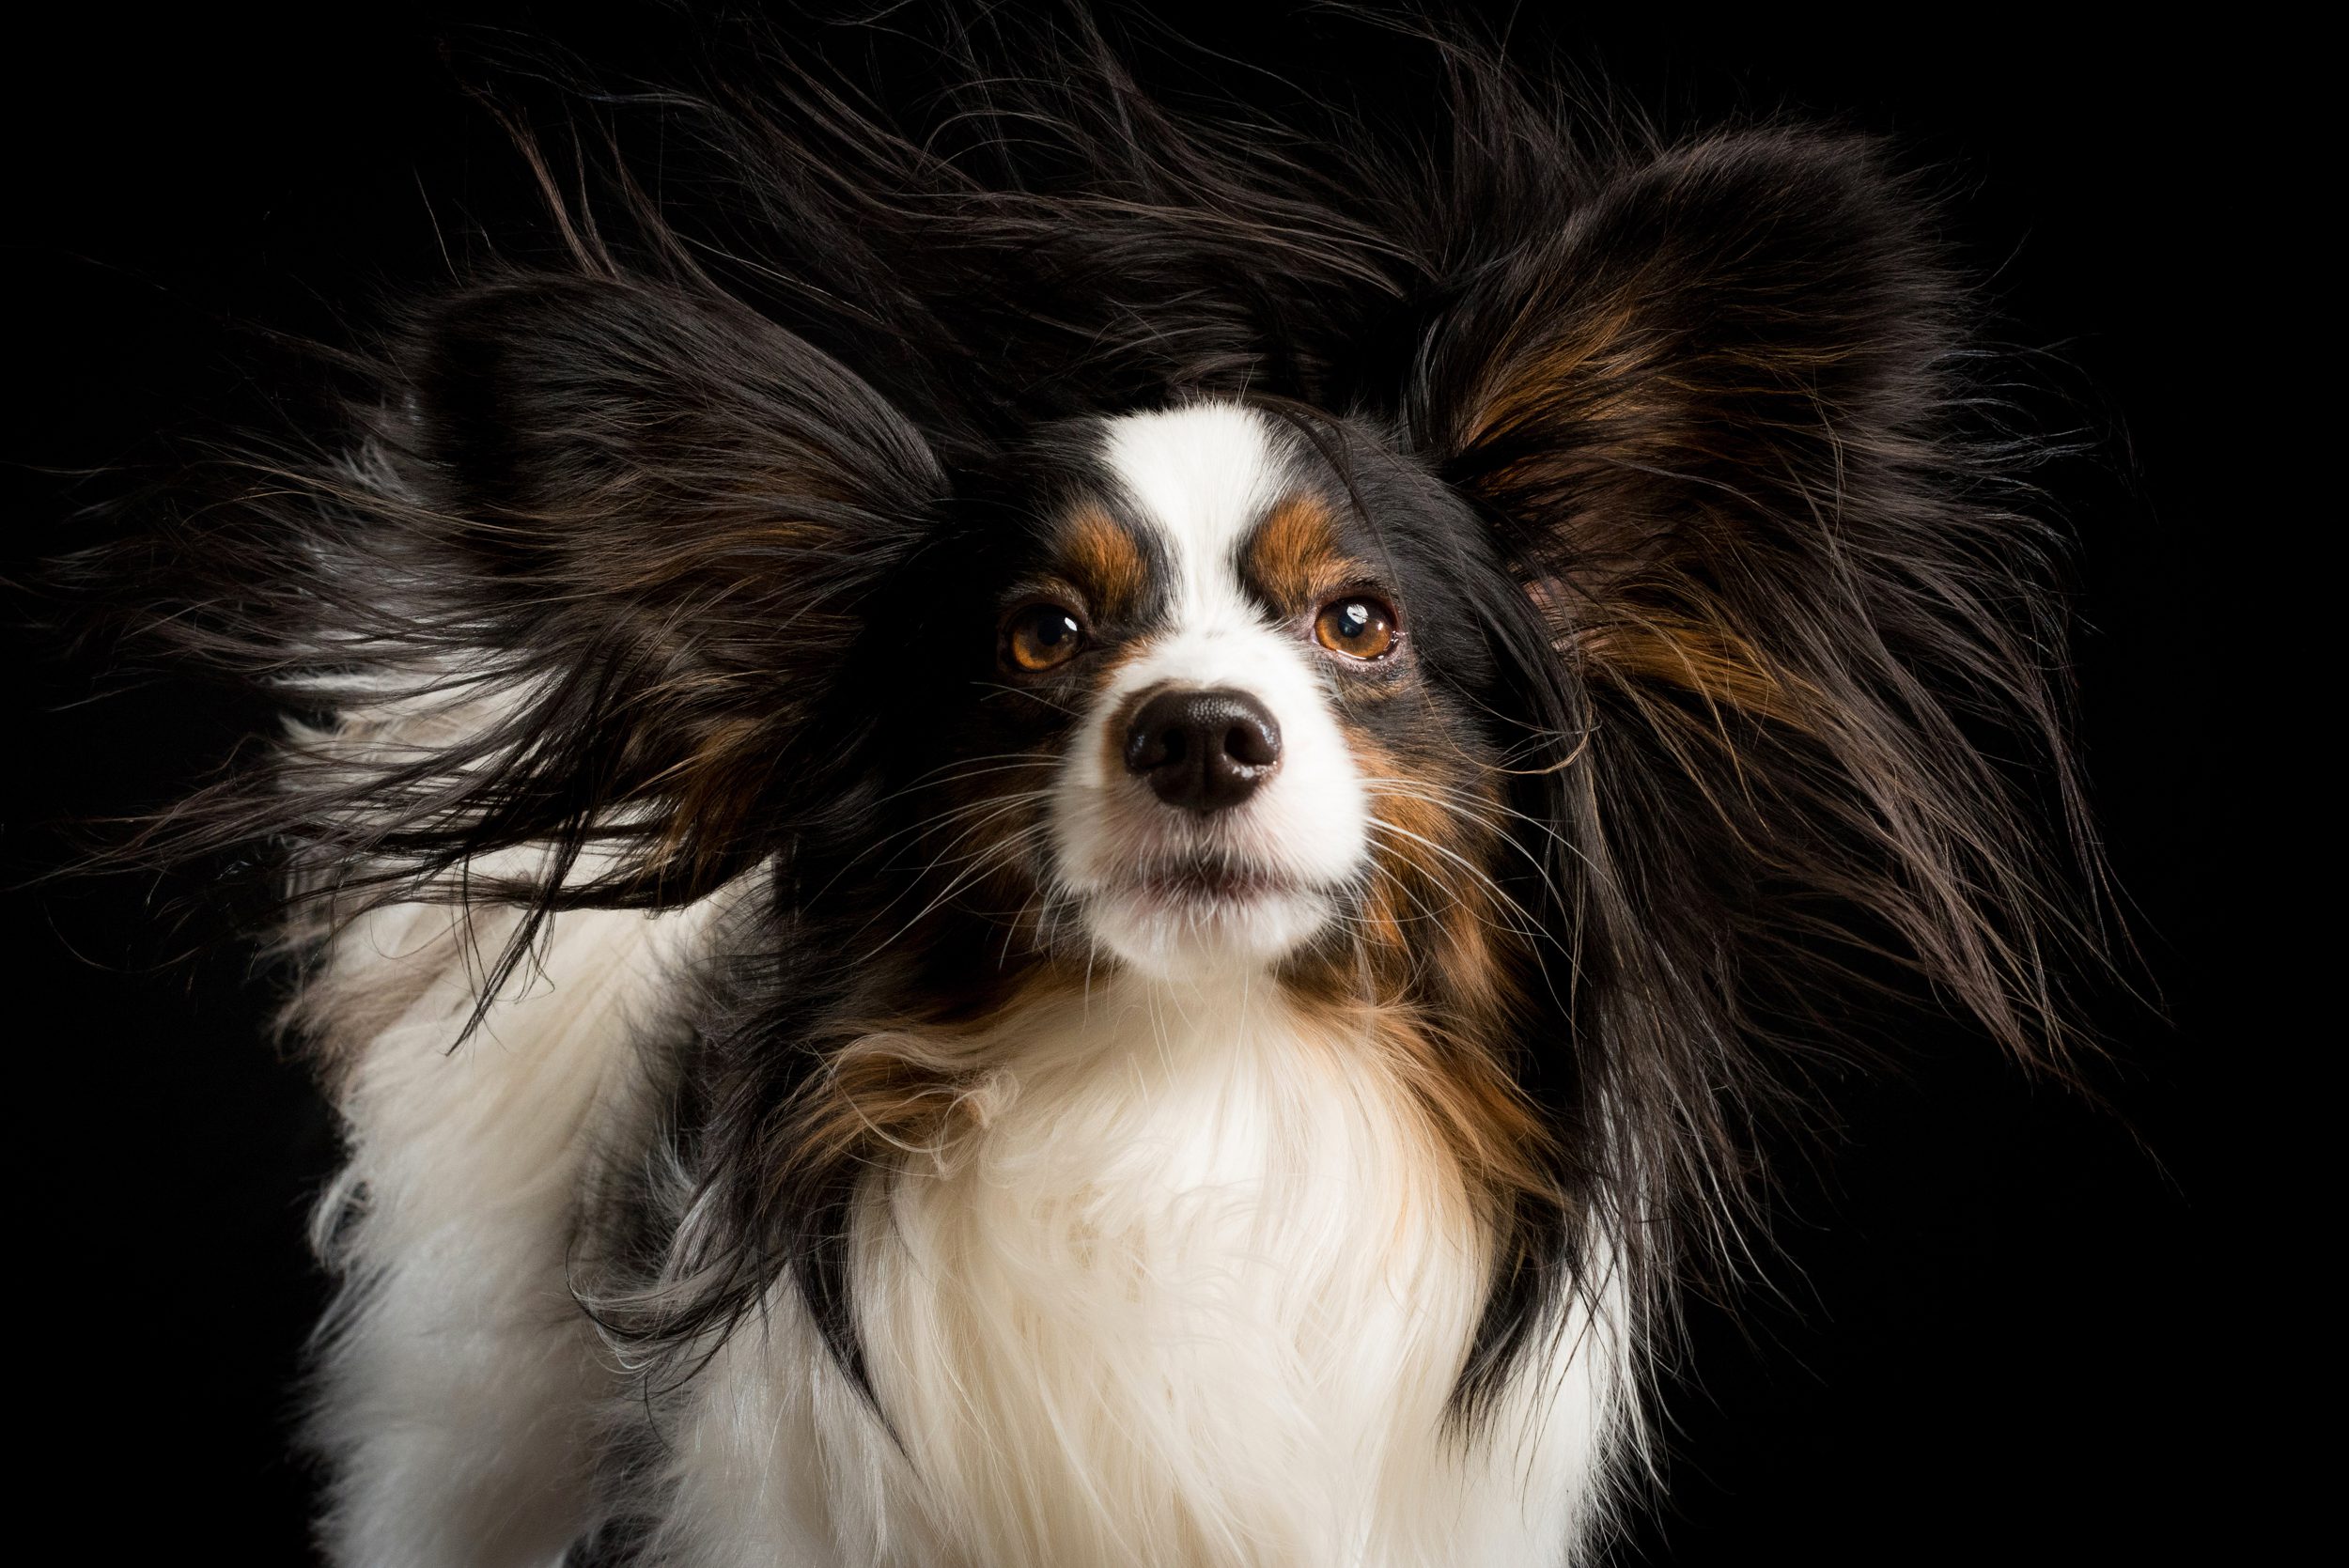 Dog Merlin getting a blowout during his photoshoot. Photographed by Candice Cusic